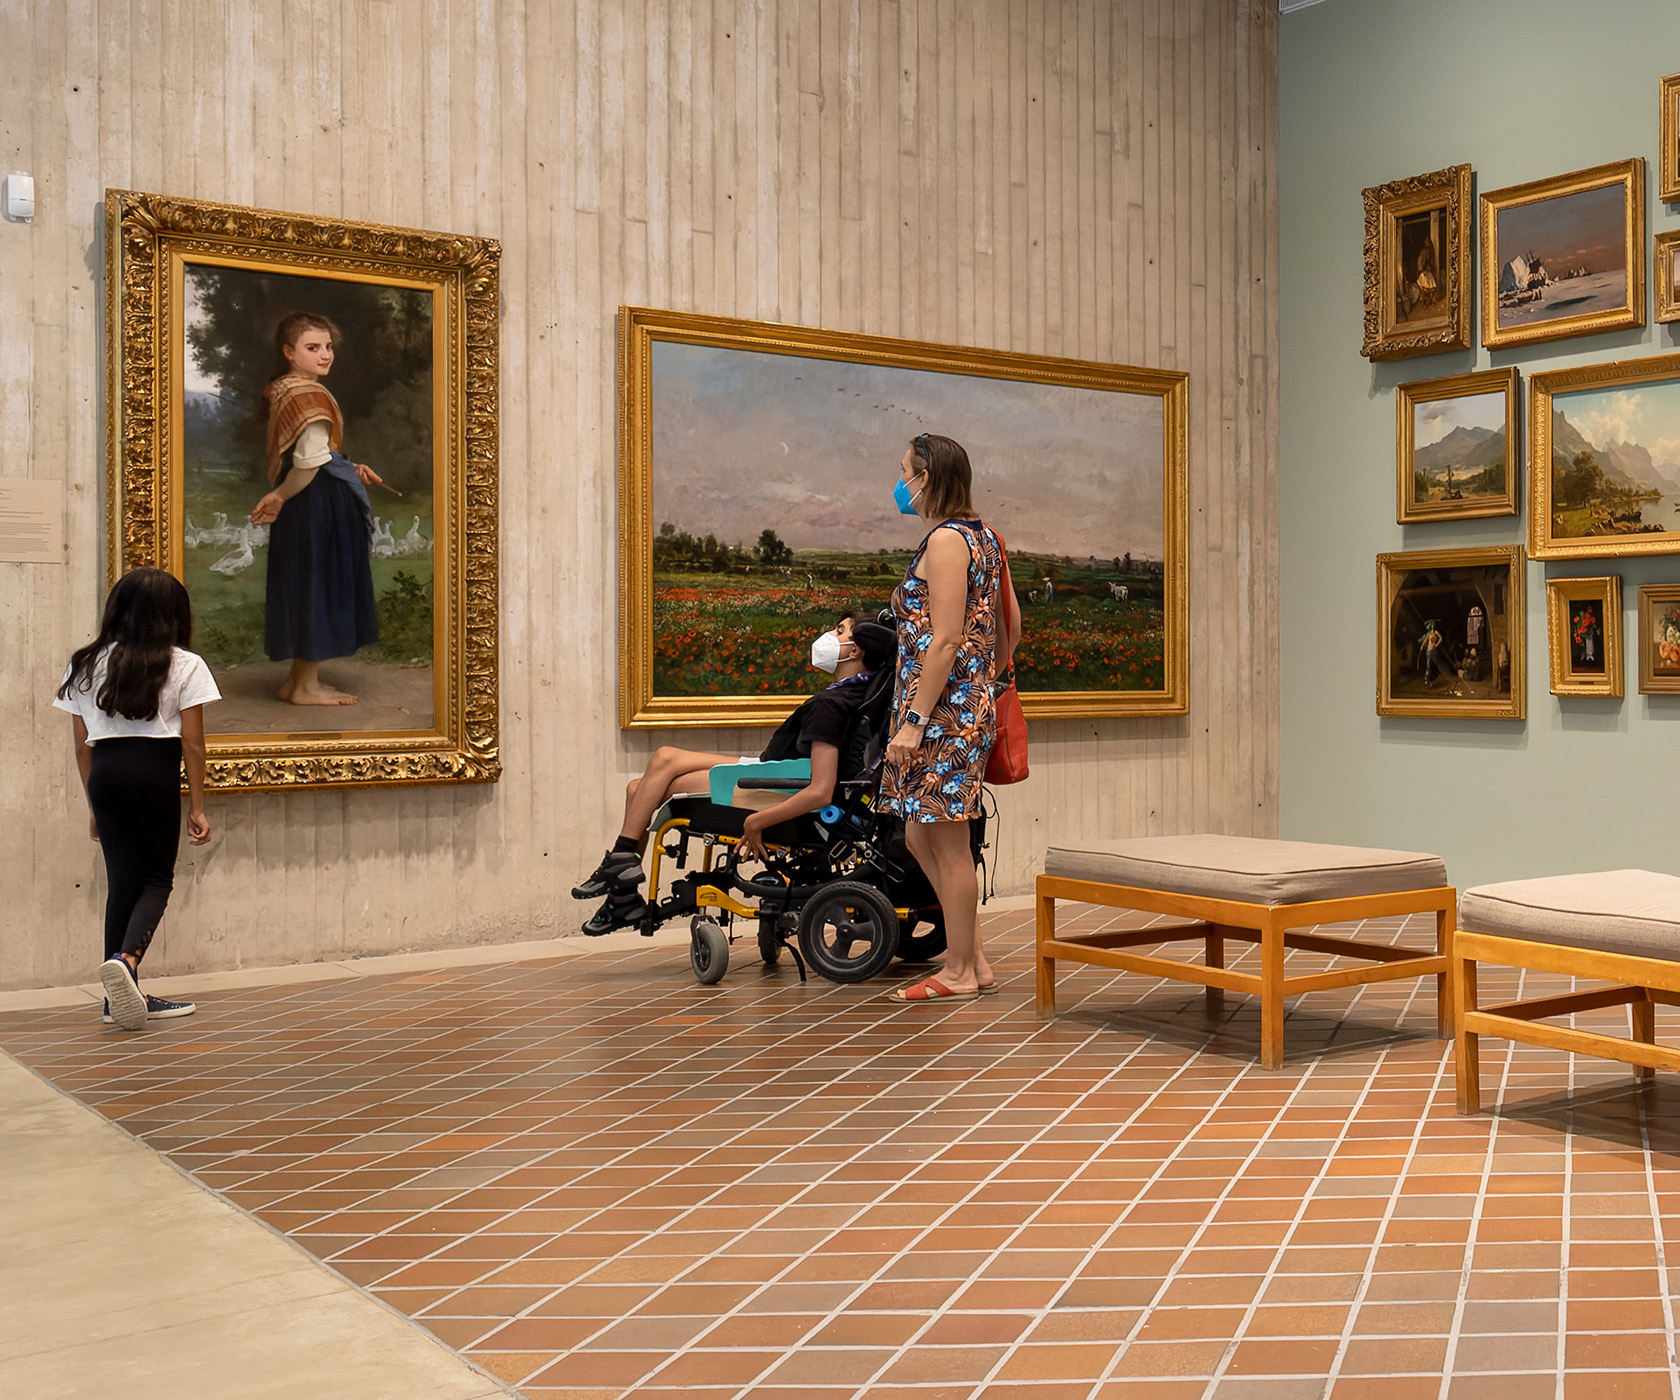 A woman, a child, and a person in a wheelchair look at large oil paintings in a museum gallery